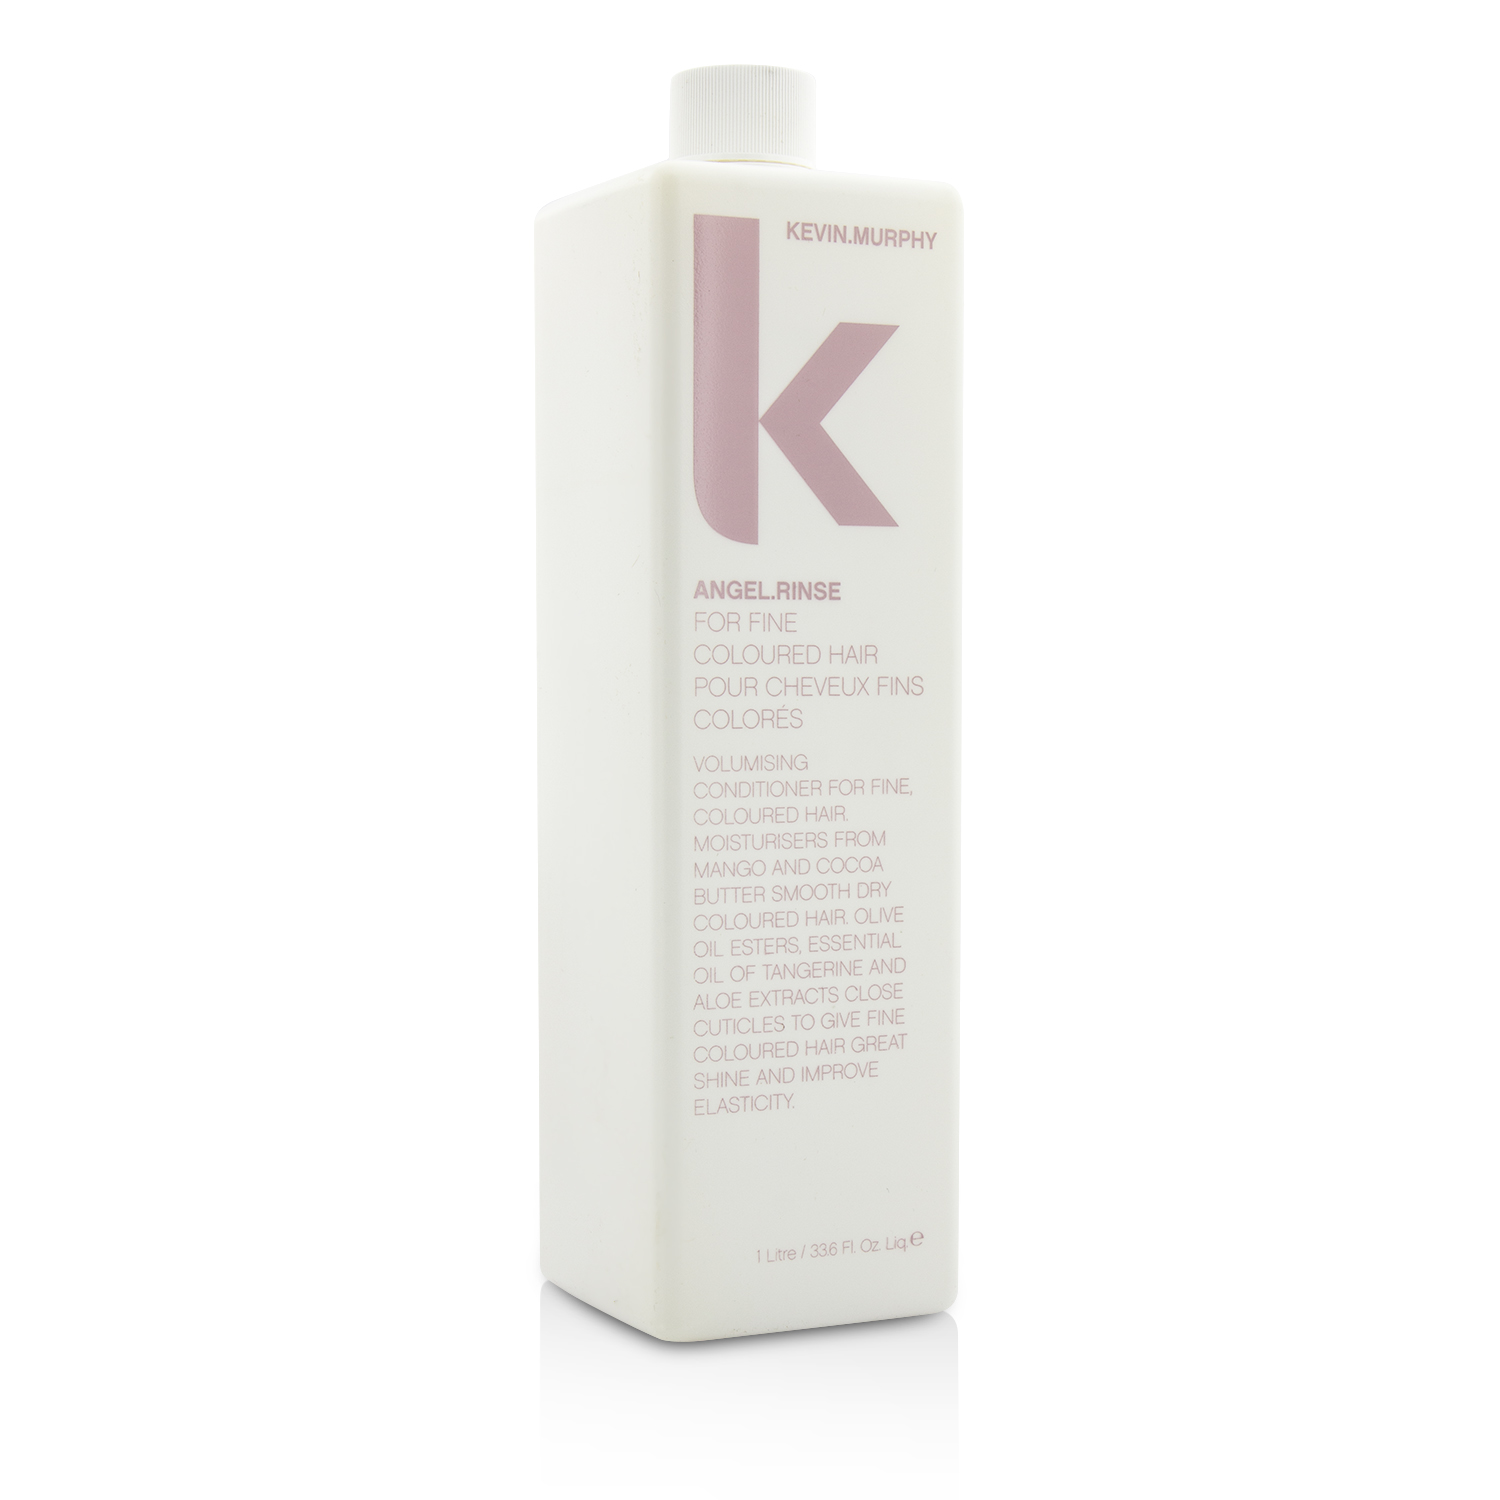 Angel.Rinse (A Volumising Conditioner - For Fine Dry or Coloured Hair) Kevin.Murphy Image